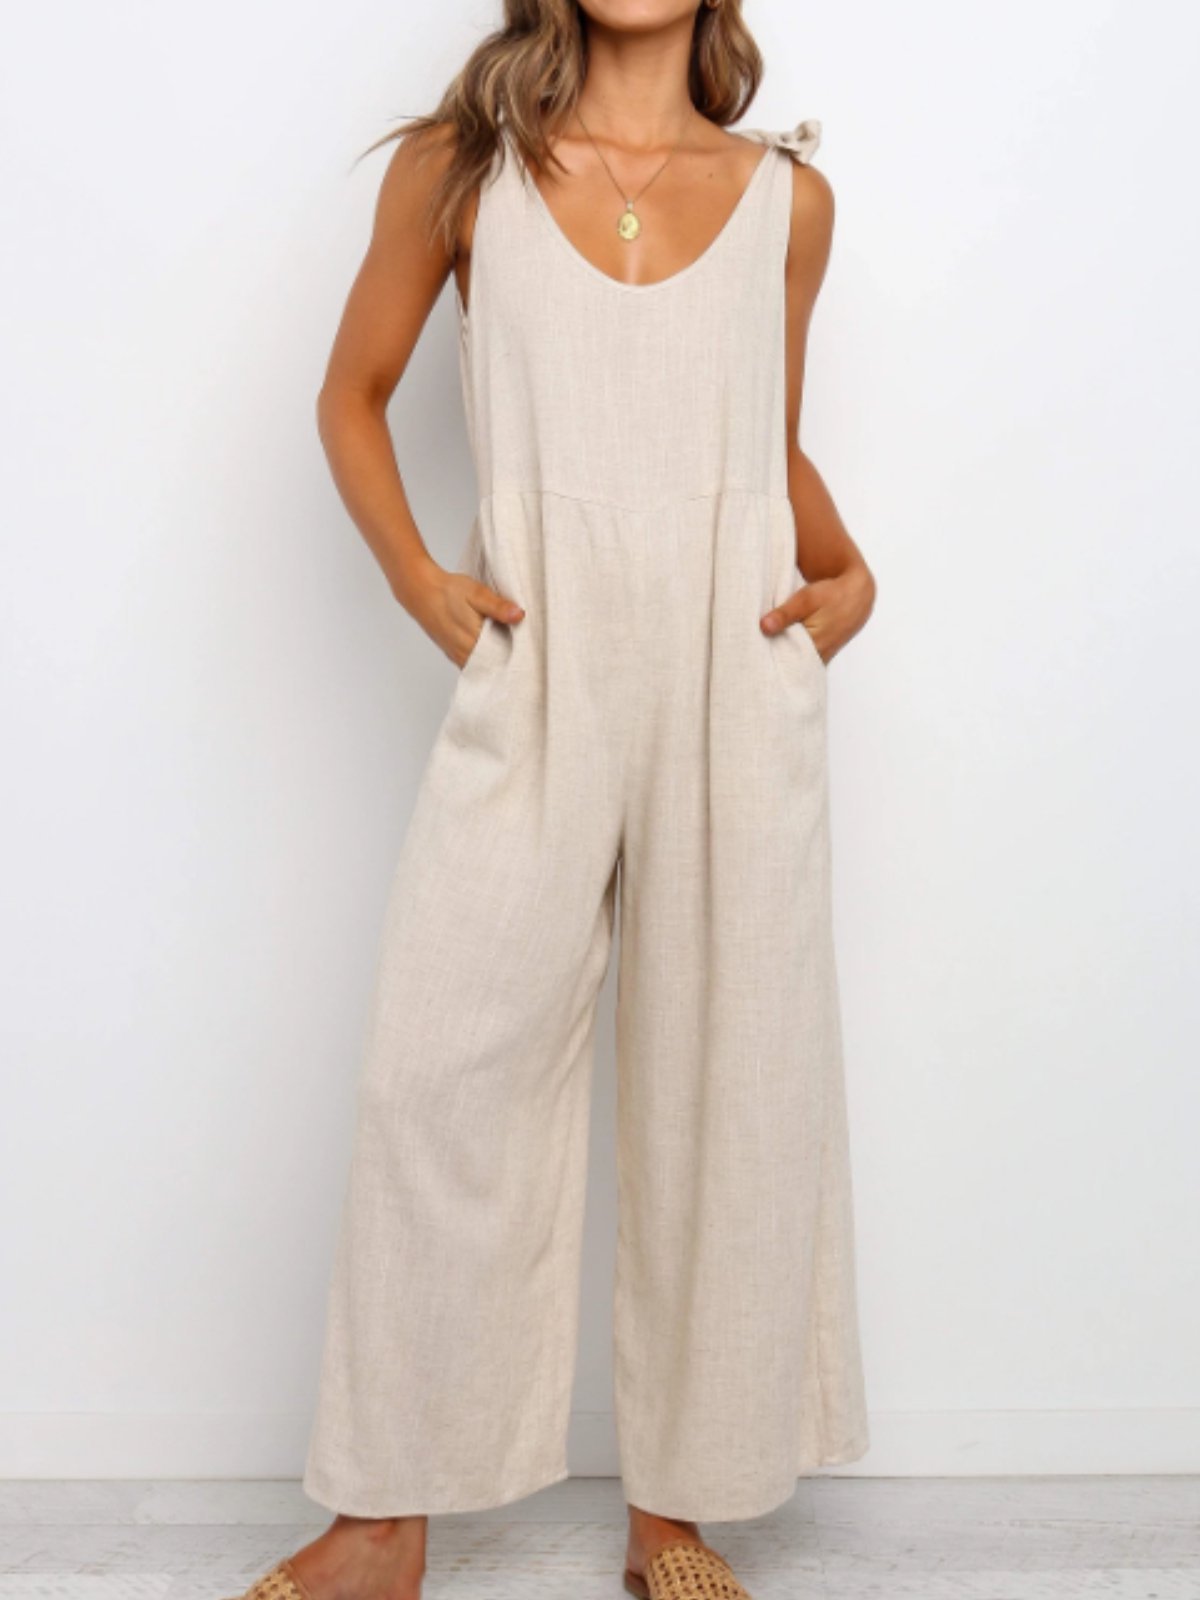 Aovica-Roselinlin Casual Plus Size Sleeveless Jumpsuit Pantsuit Overalls